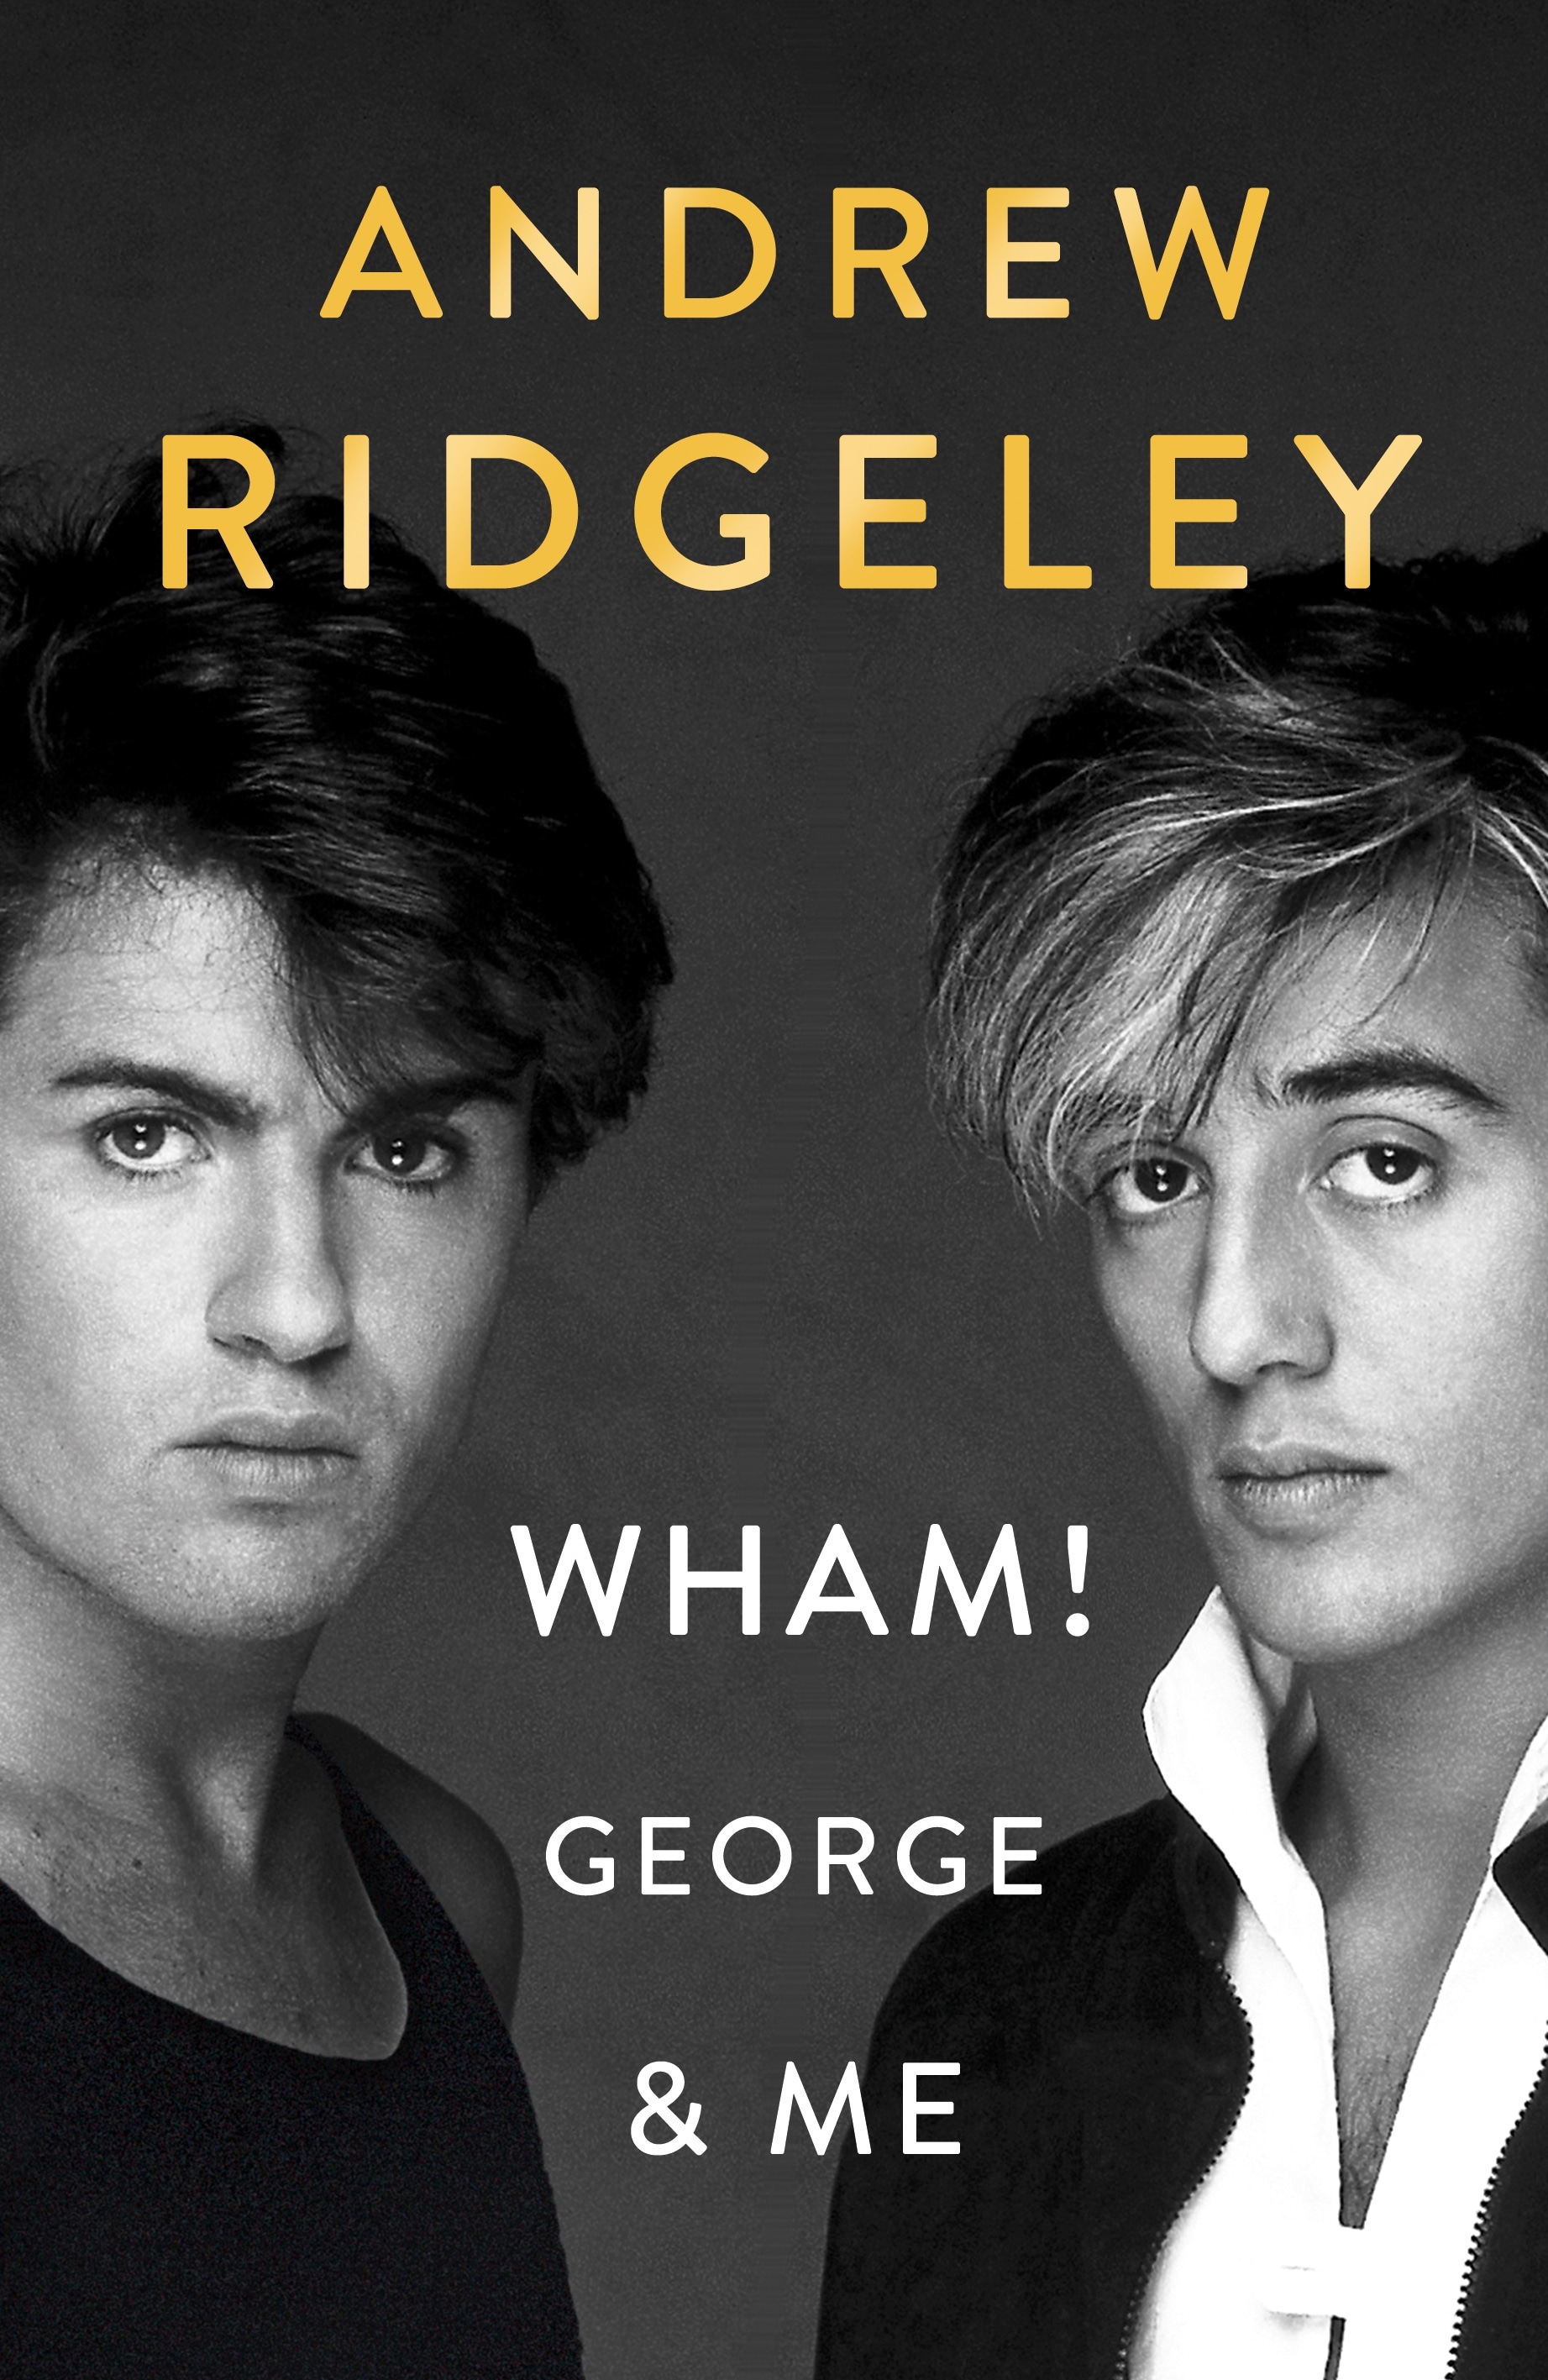 Book “Wham! George & Me” by Andrew Ridgeley — October 3, 2019